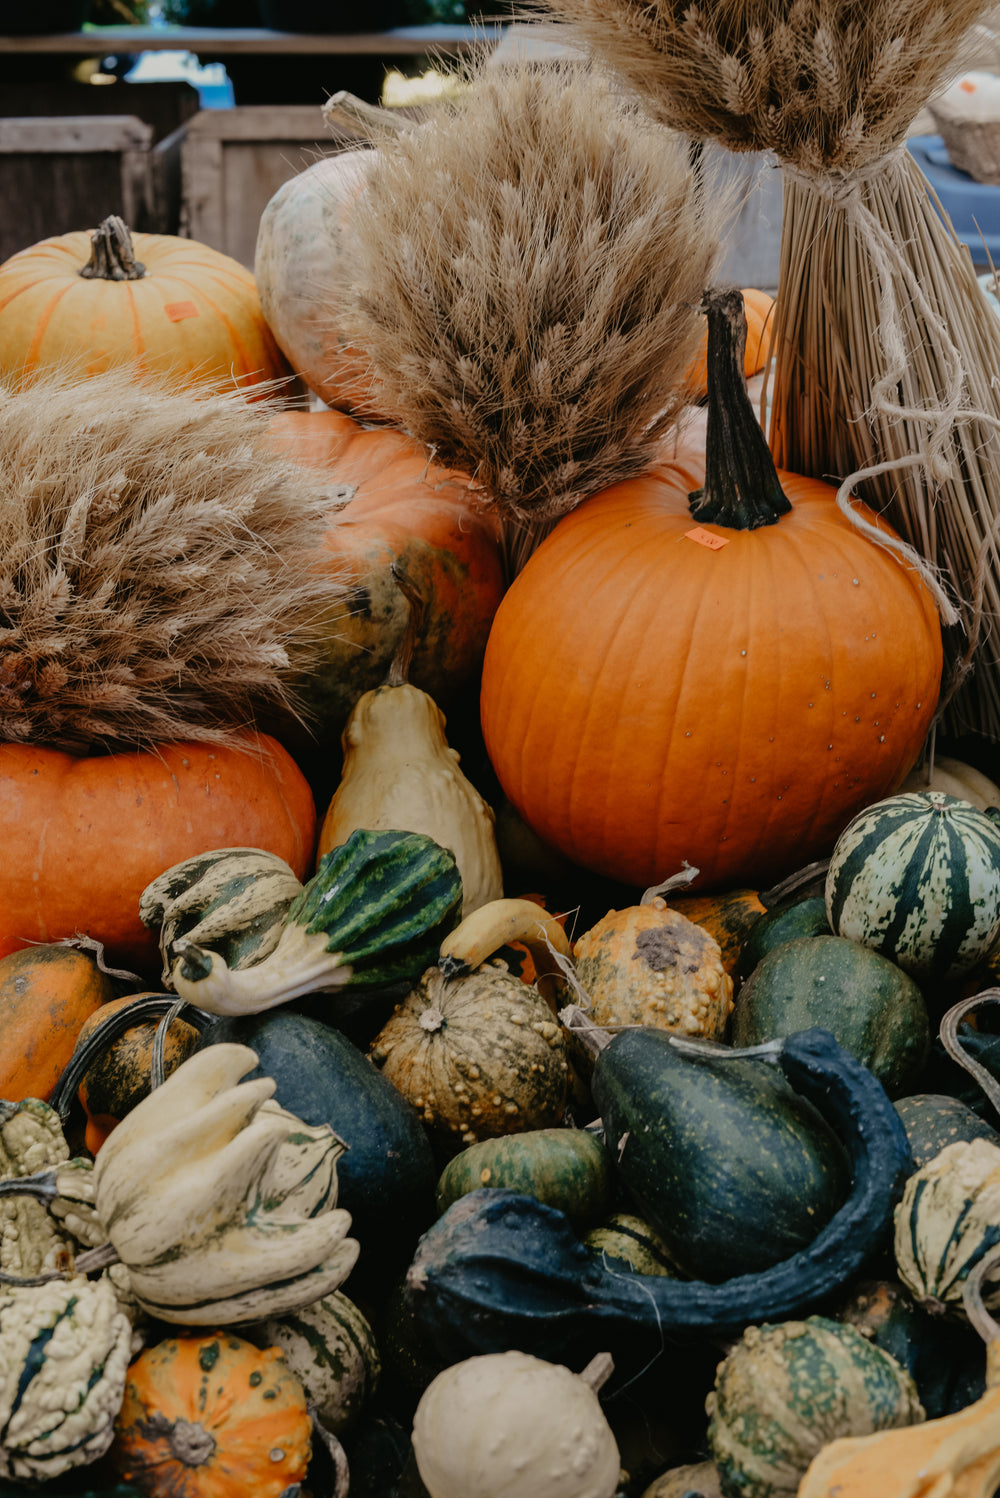 Thanksgiving or Halloween background with dried plants and fallen